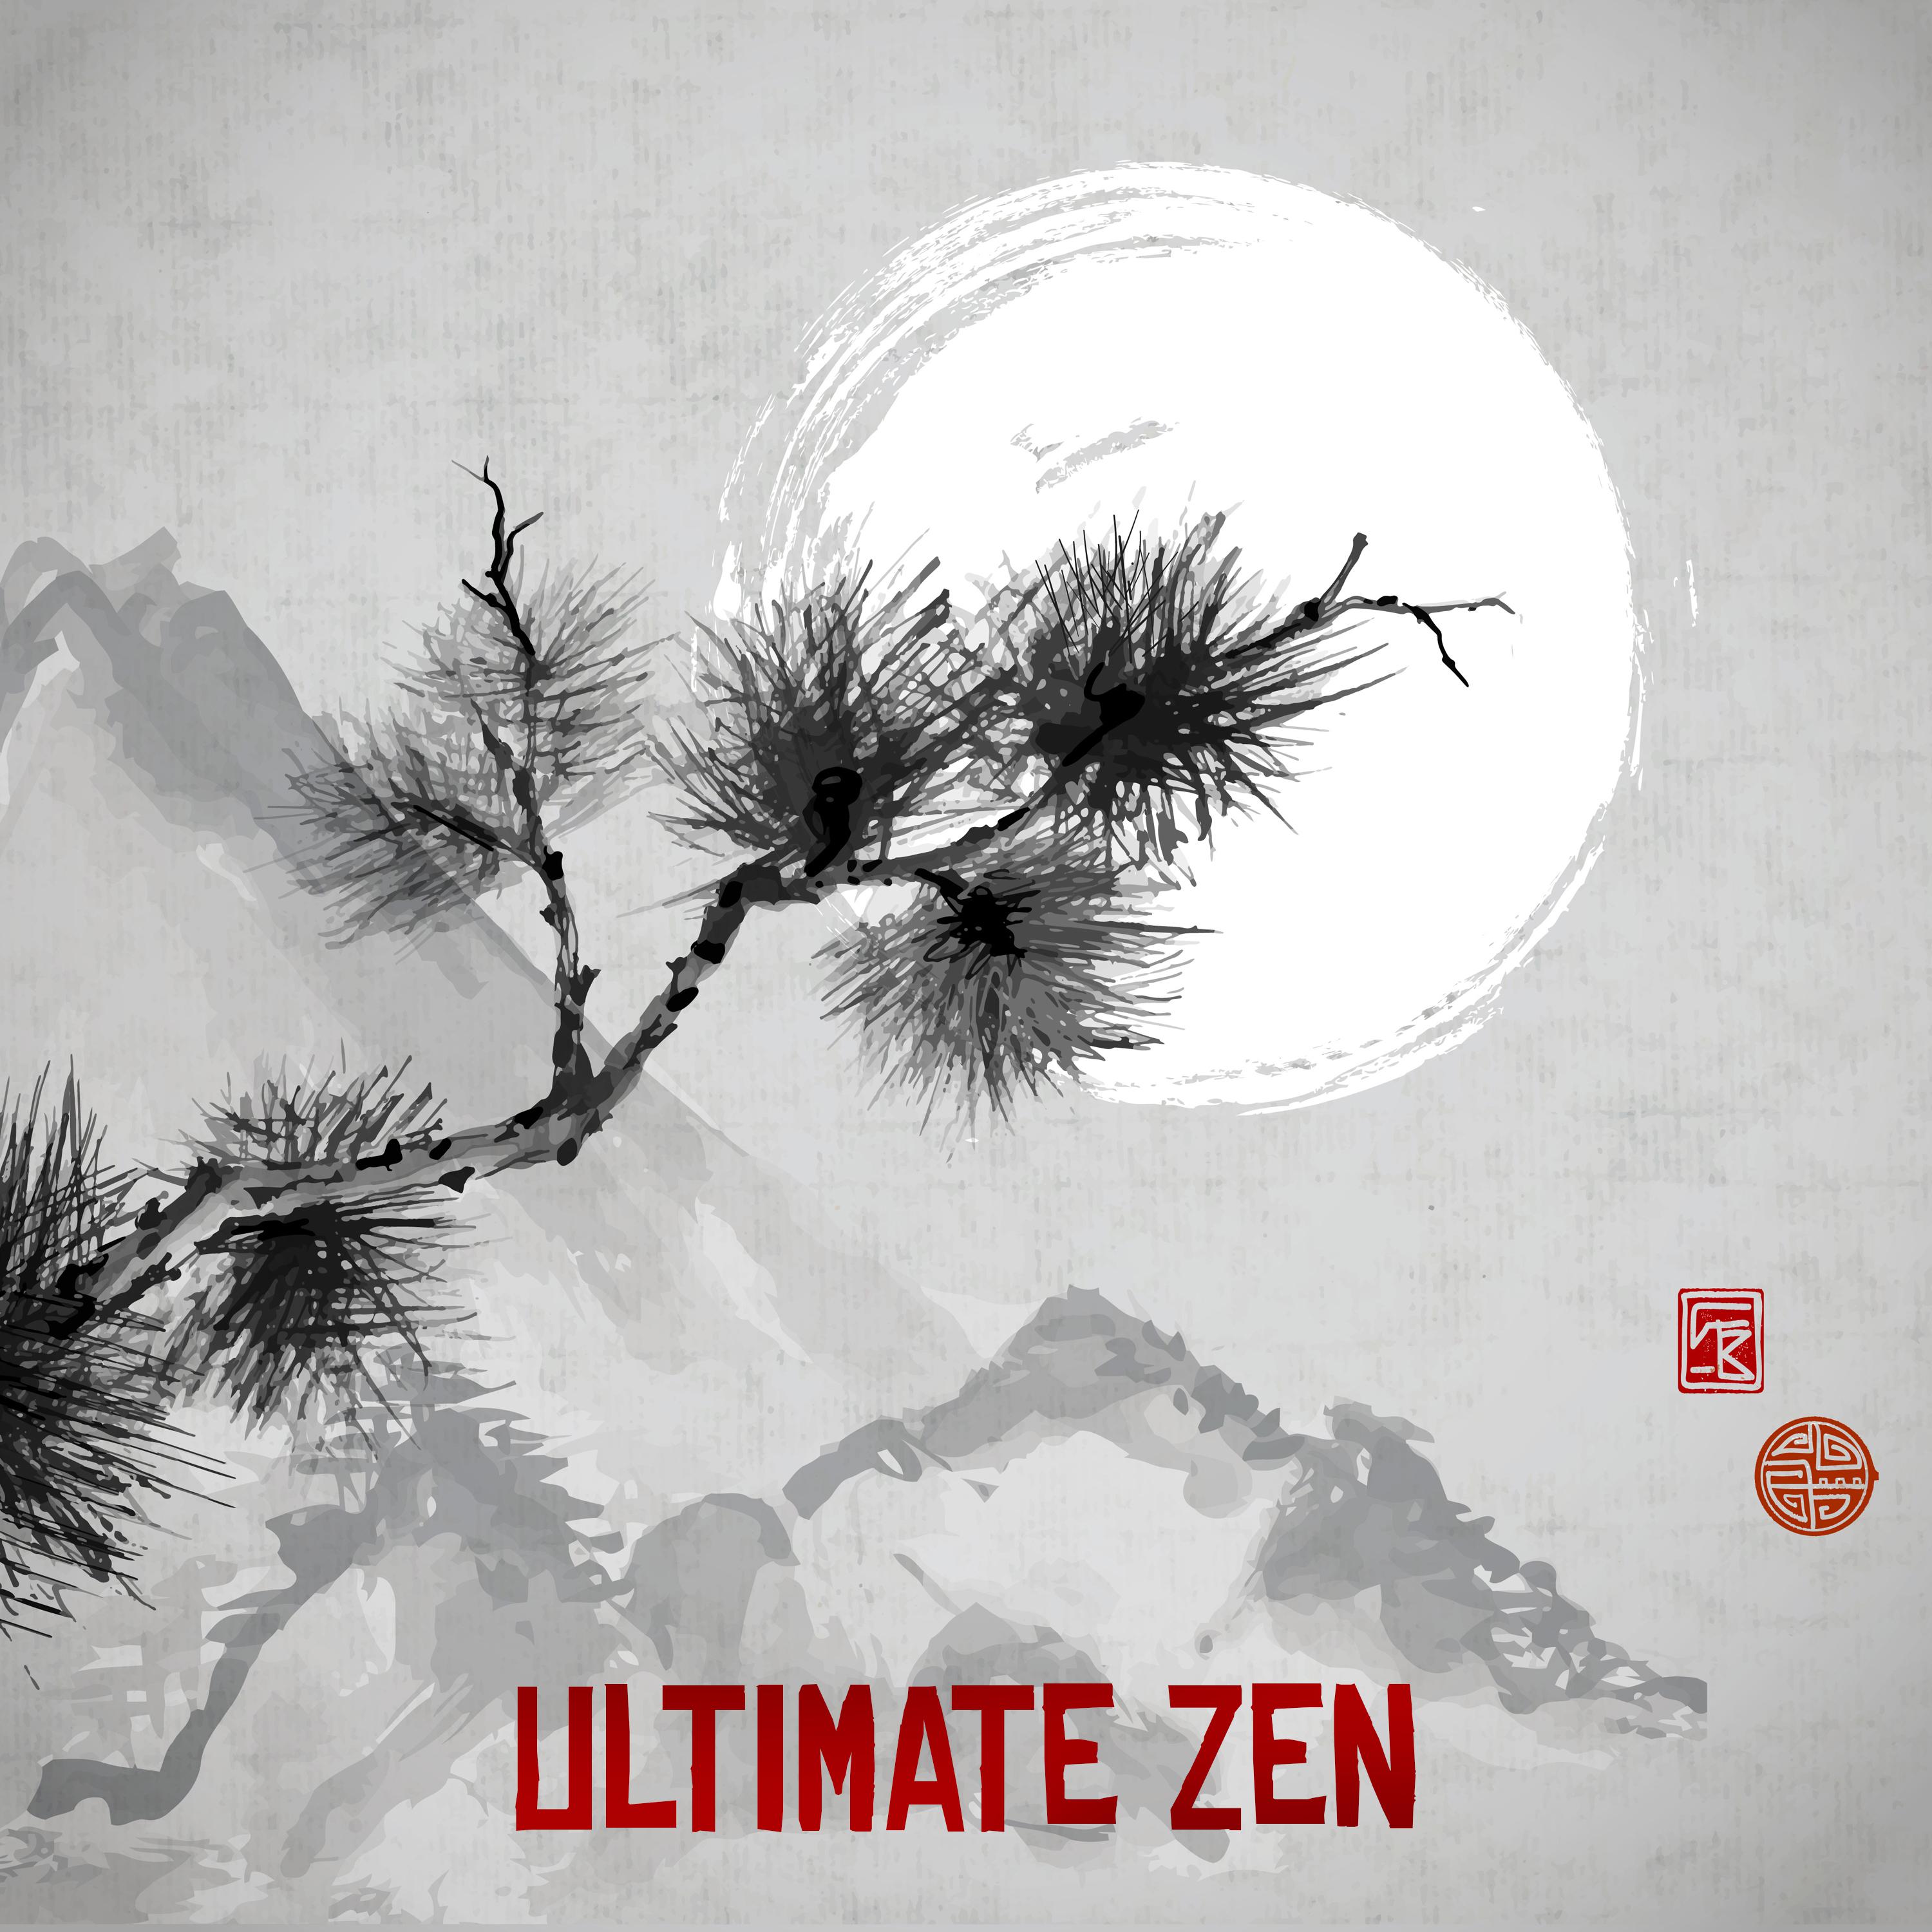 Ultimate Zen (Top 100 of Oriental Music, Asian Flute, Relaxation Meditation with Yang Qin, Healing Practice, Finding Harmony, Restorative Music Energy)